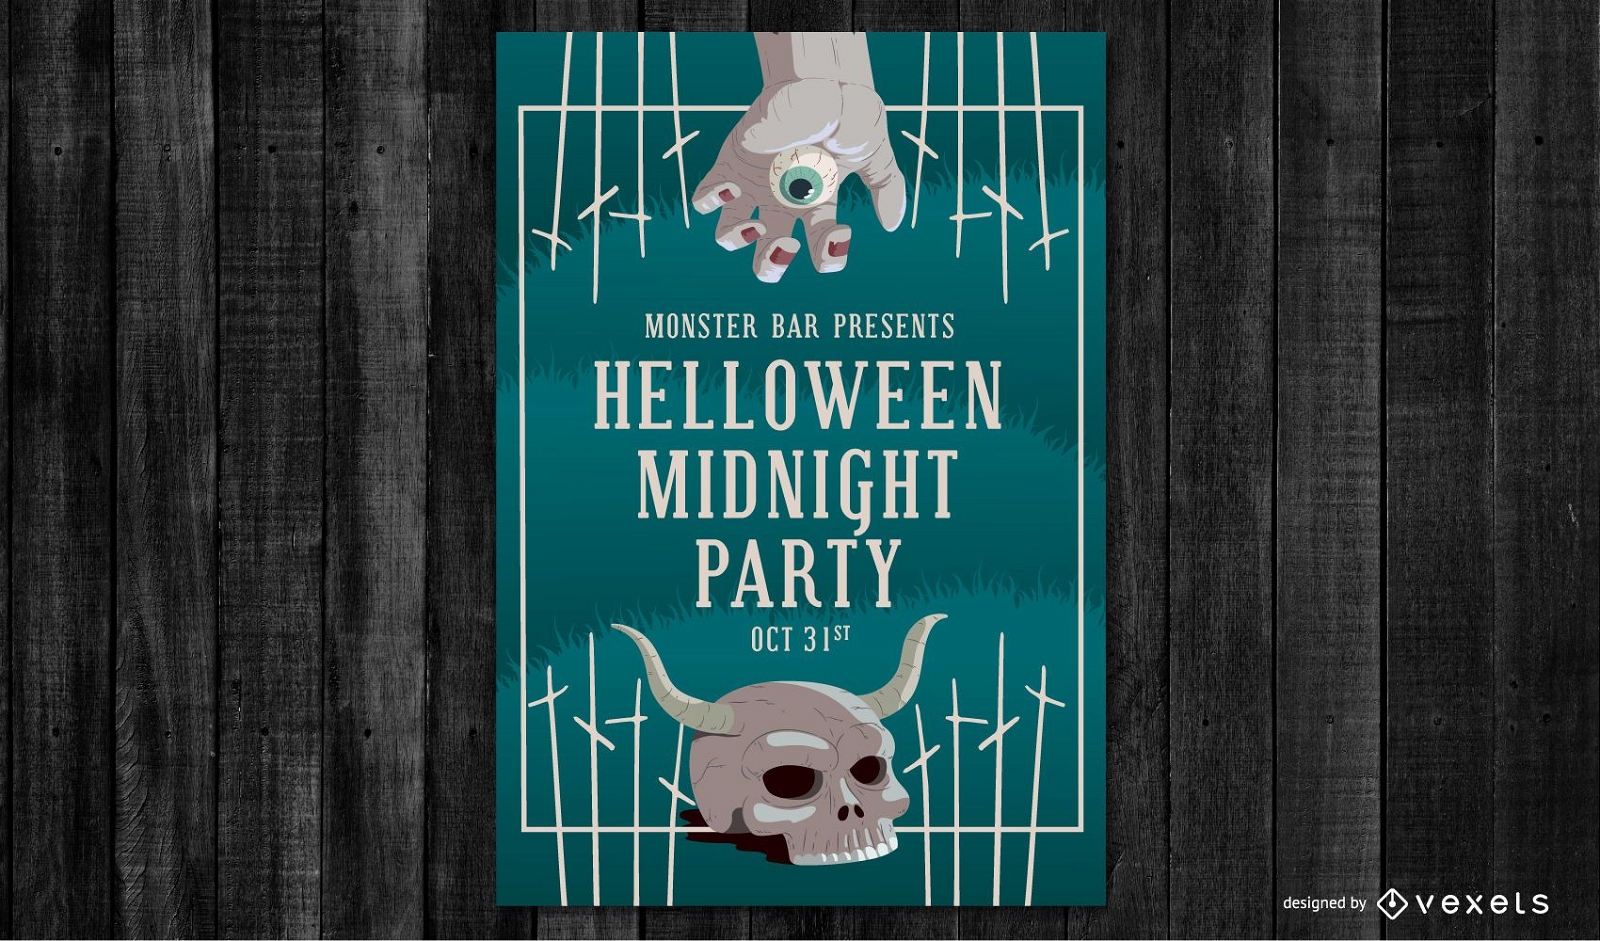 Halloween midnight party poster